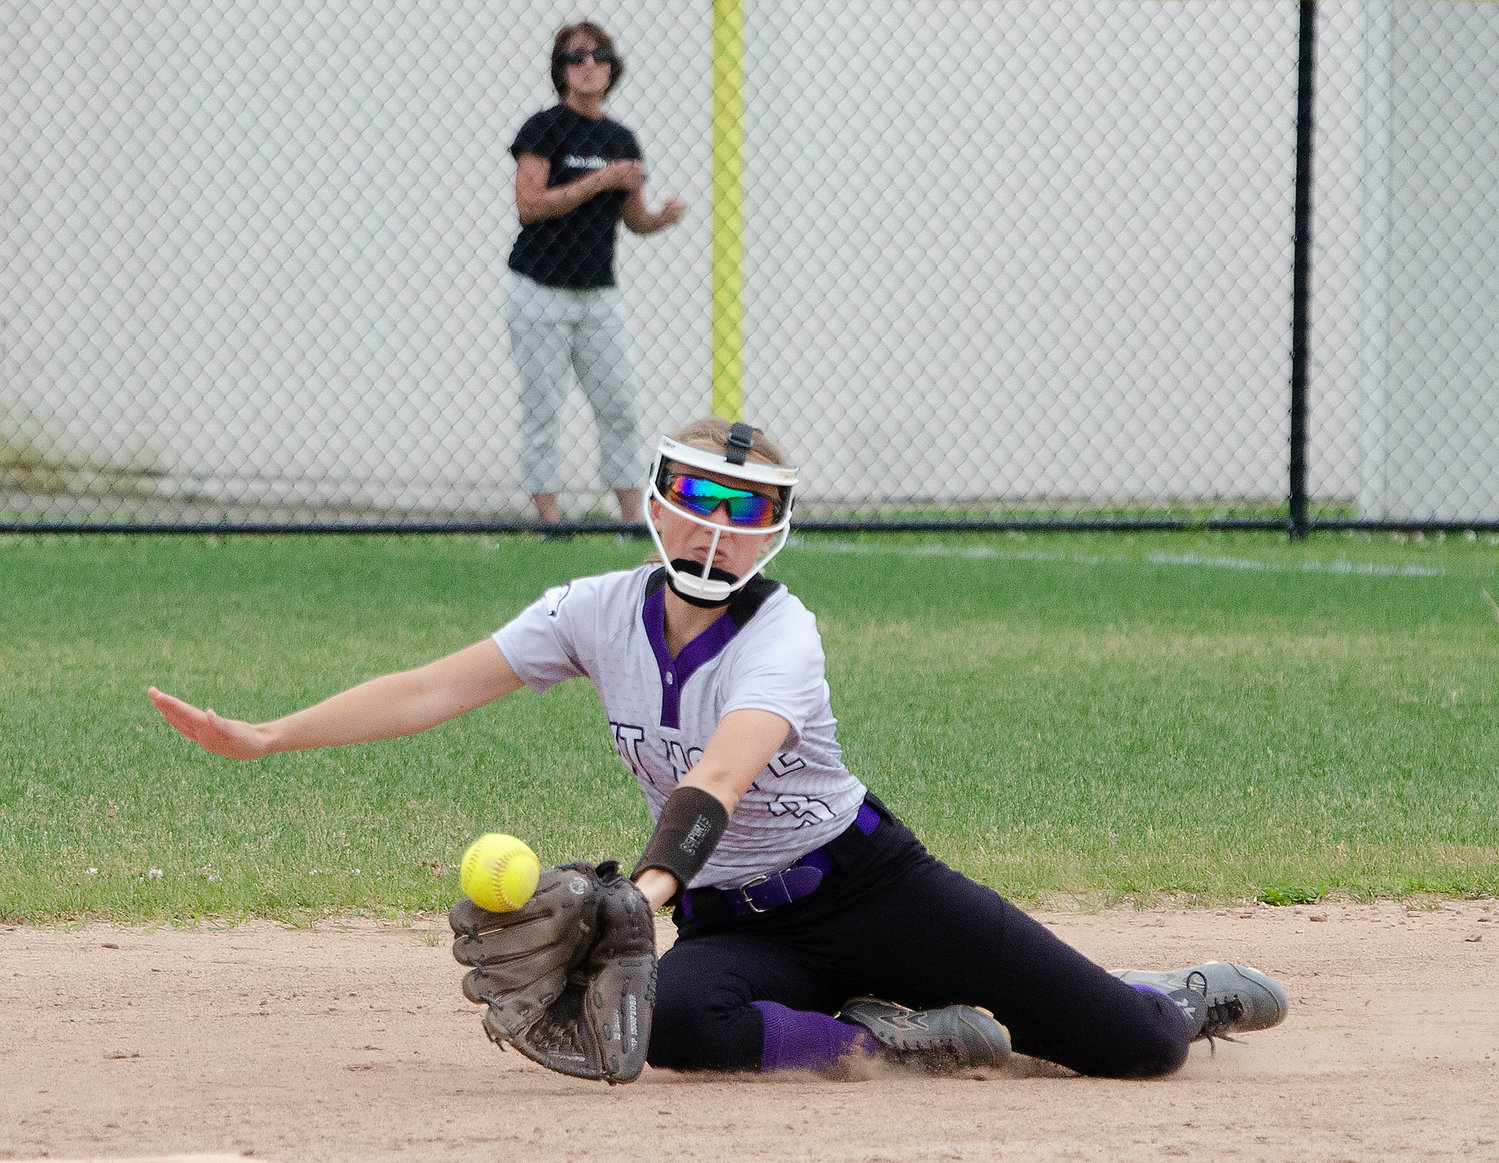 Second baseman Alice Grantham attempts to snare a grounder up the middle.